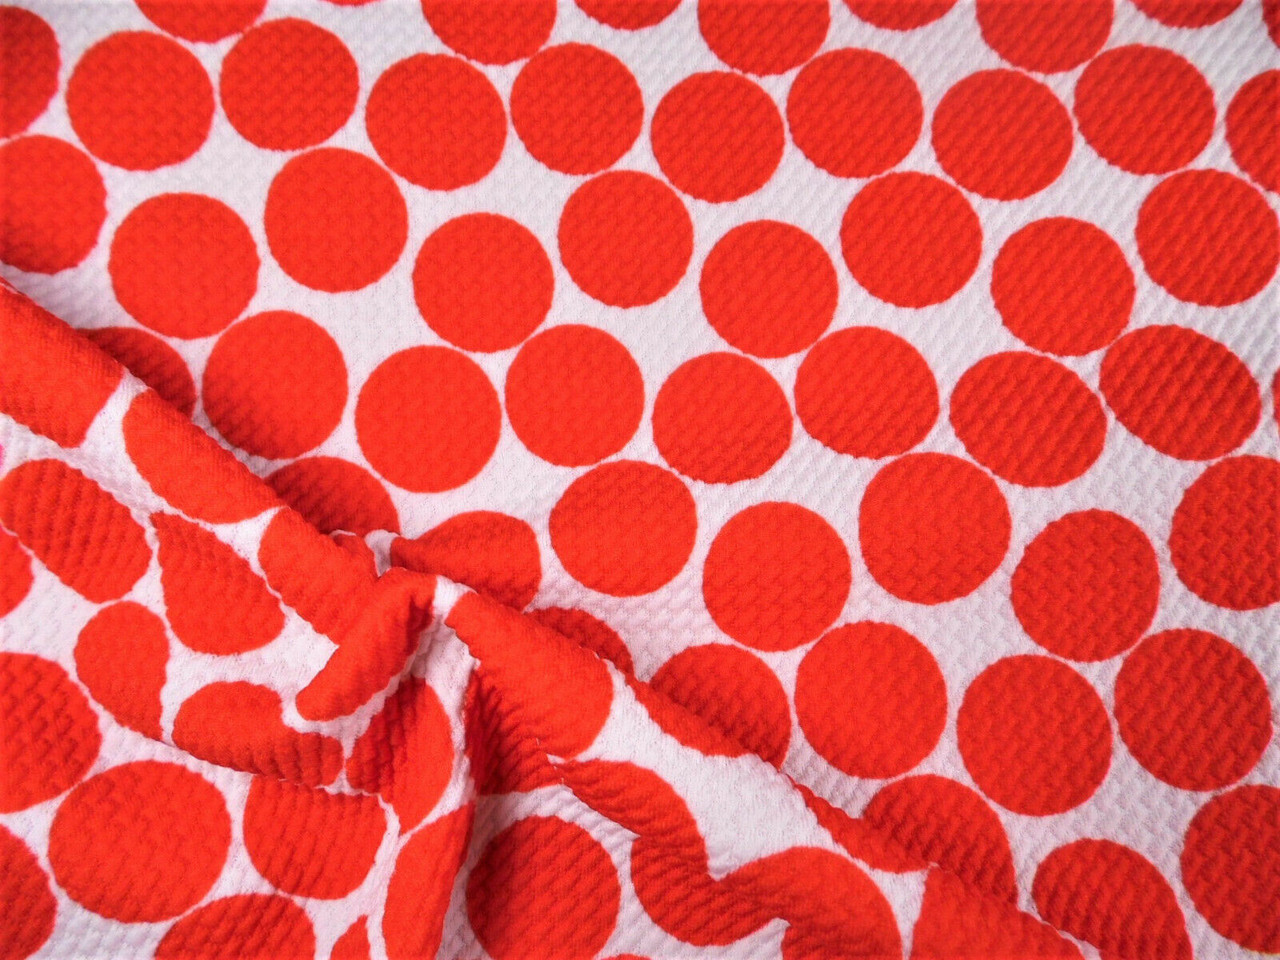 Bullet Printed Liverpool Textured Fabric Stretch White Big Red Polka Dot N11